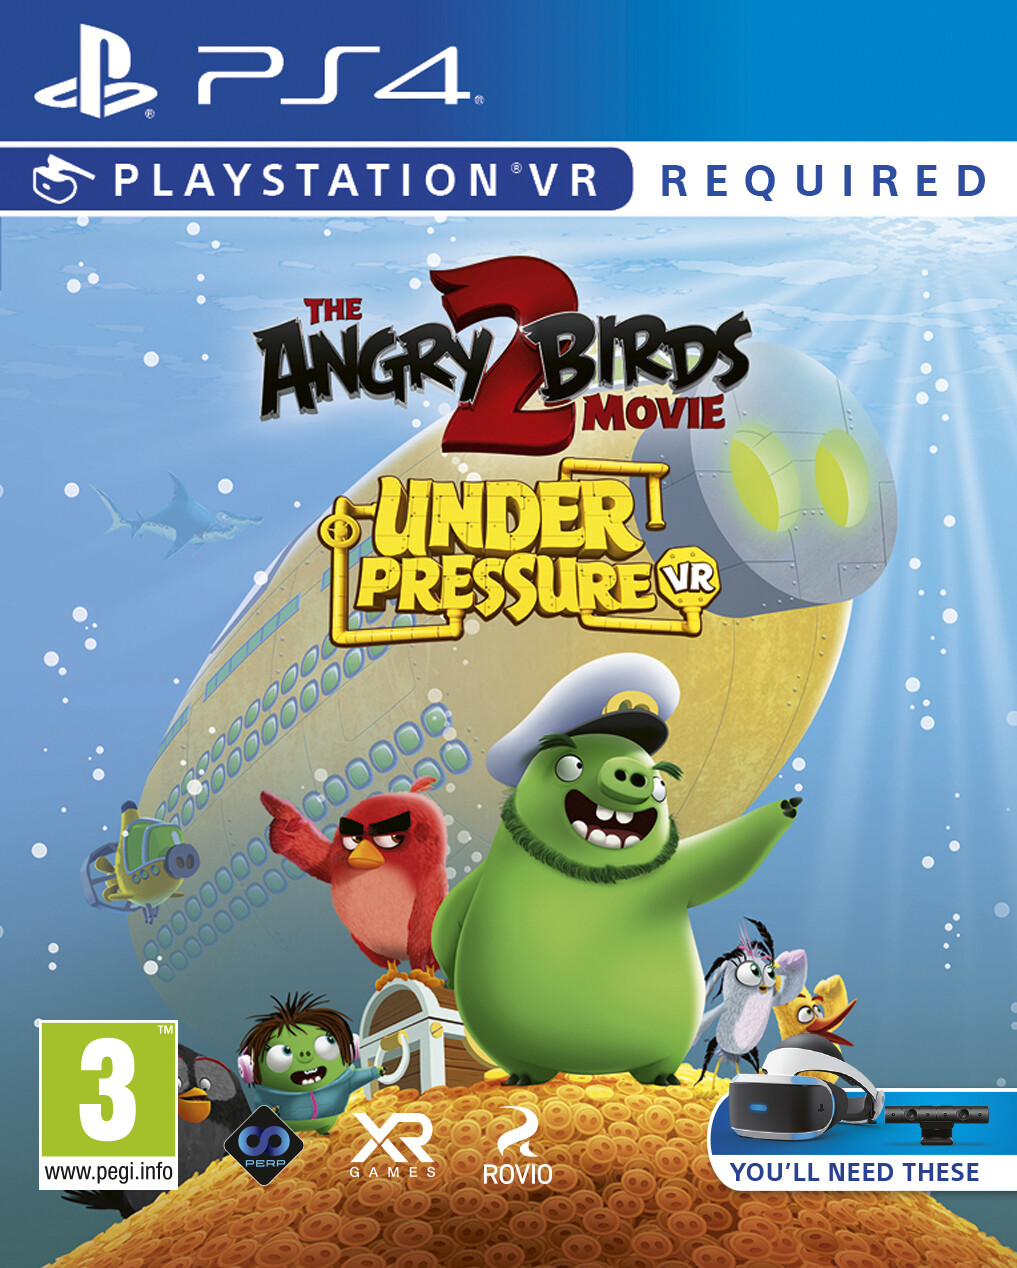 The Angry Birds 2 Vr: Under Pressure ps4 → billigt her -